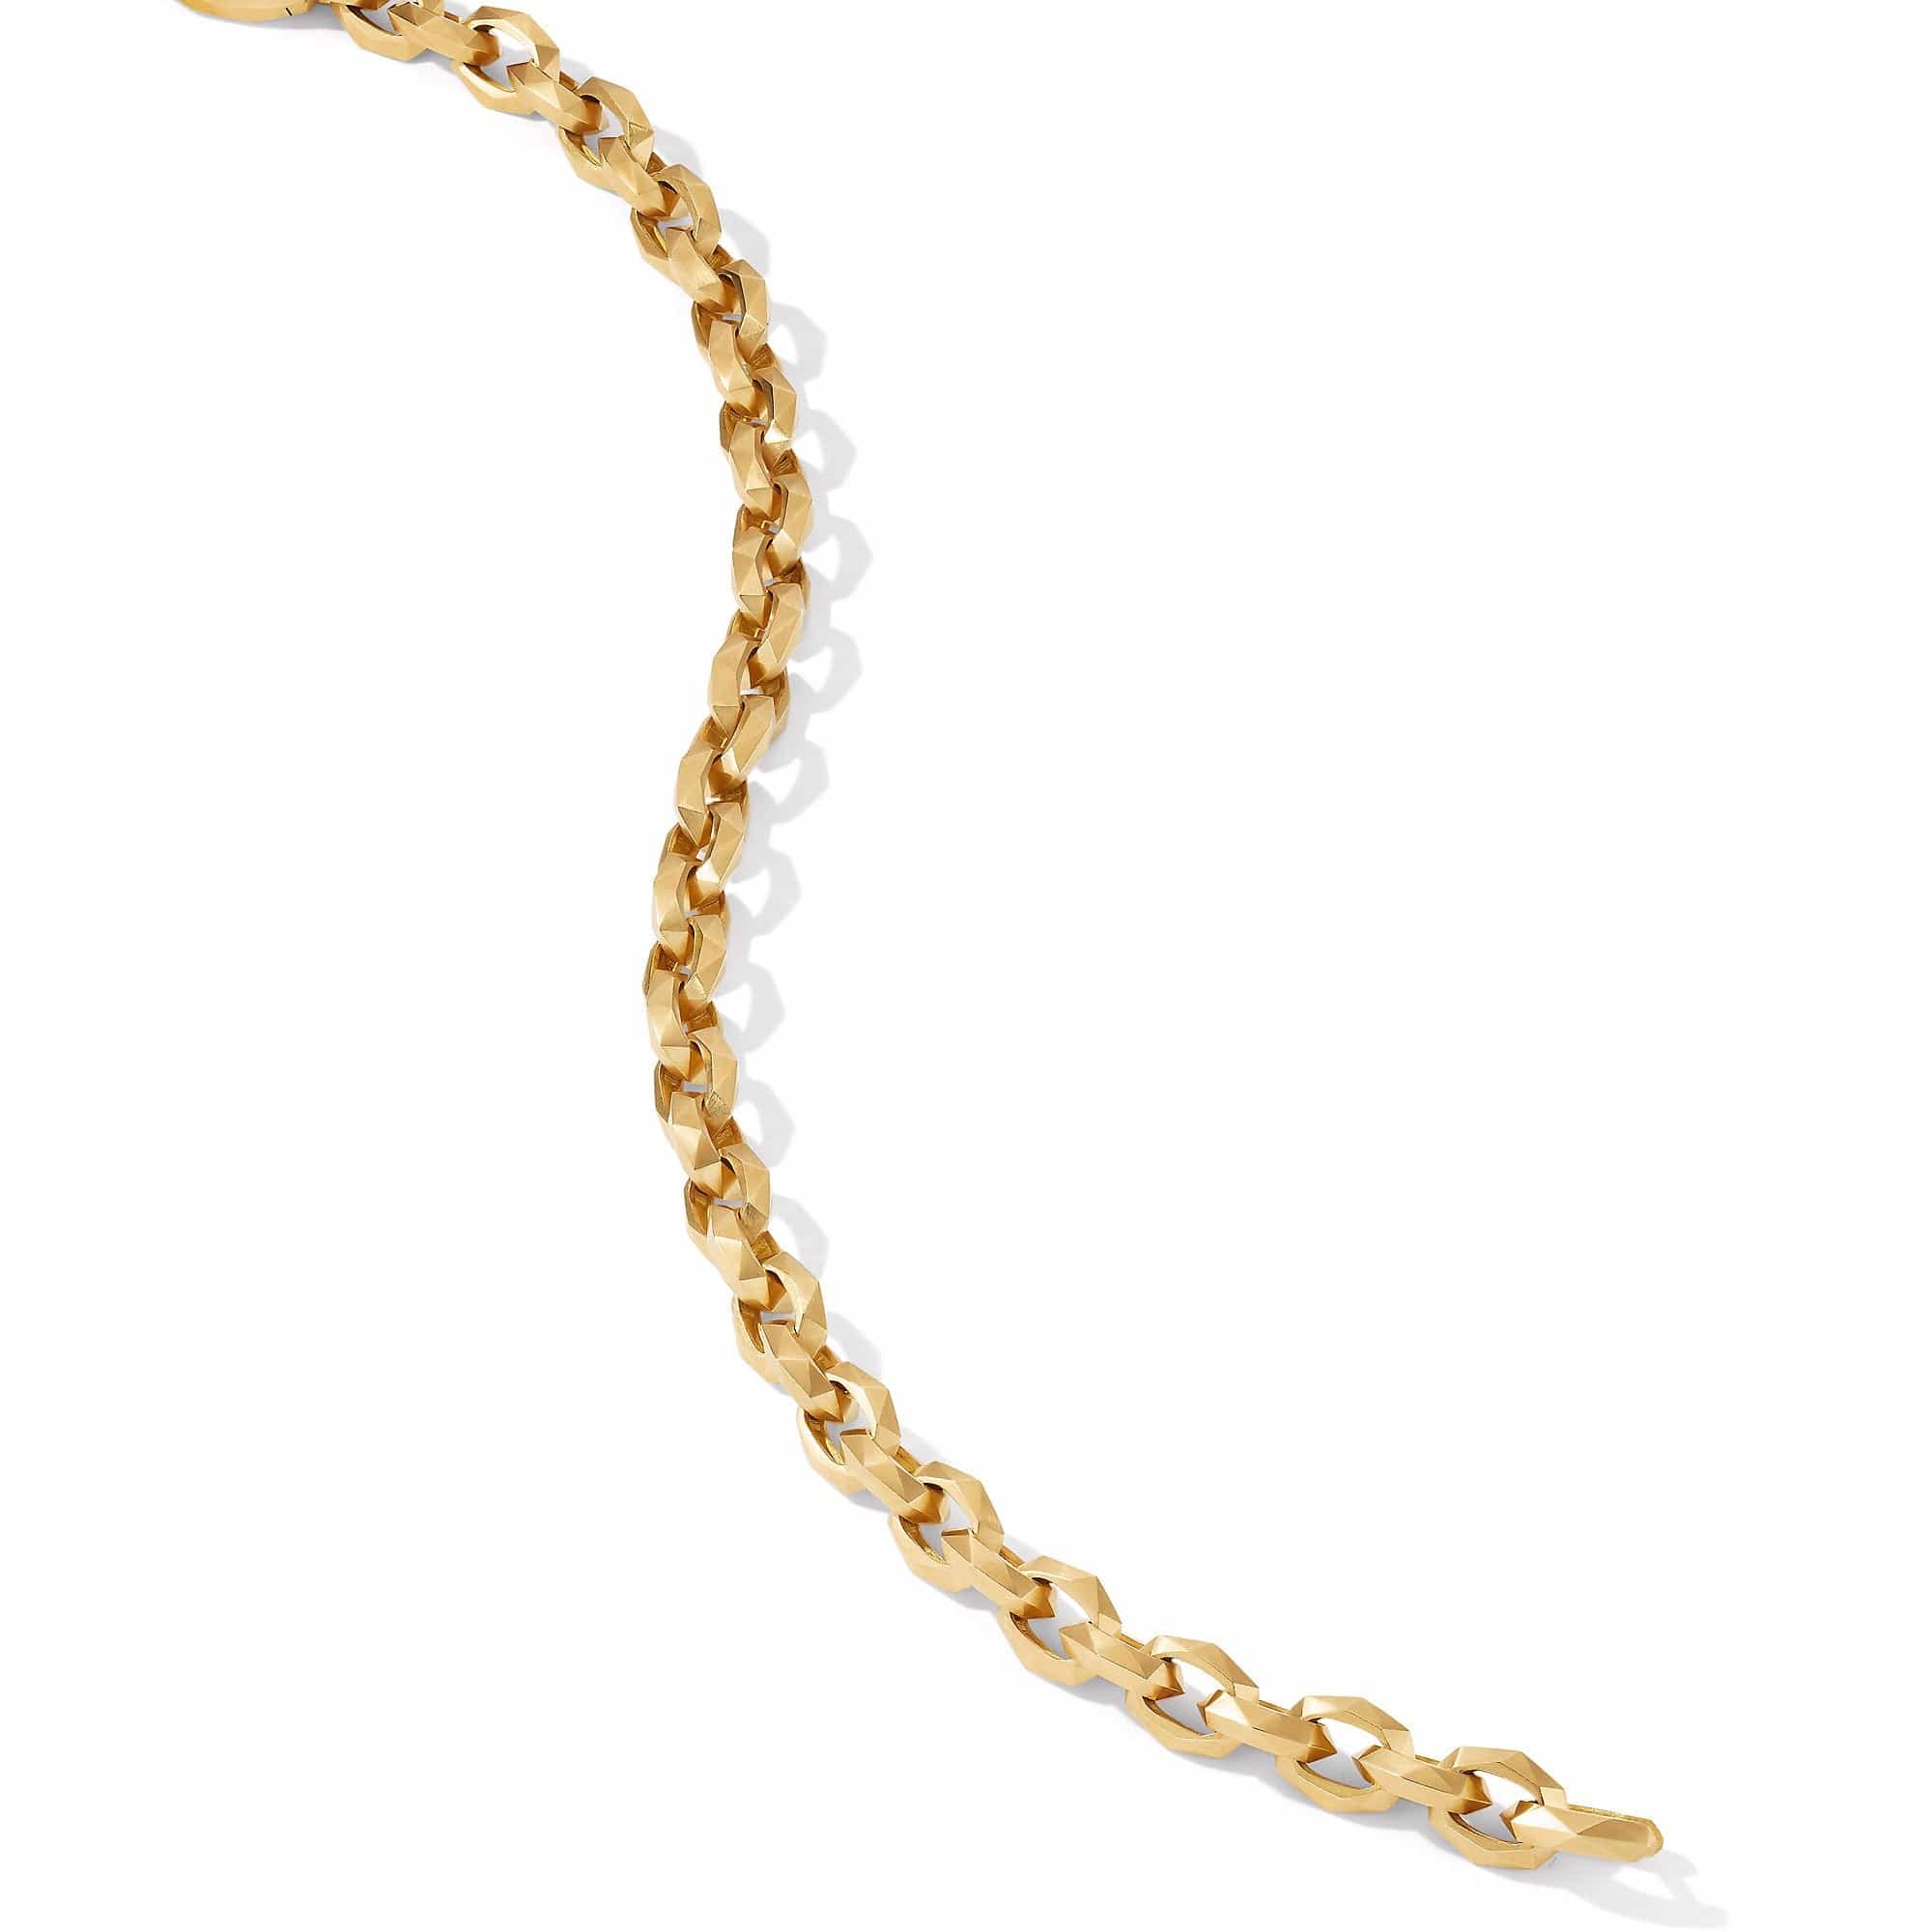 Torqued Faceted Chain Link Bracelet in 18K Yellow Gold, Yellow Gold, Long's Jewelers